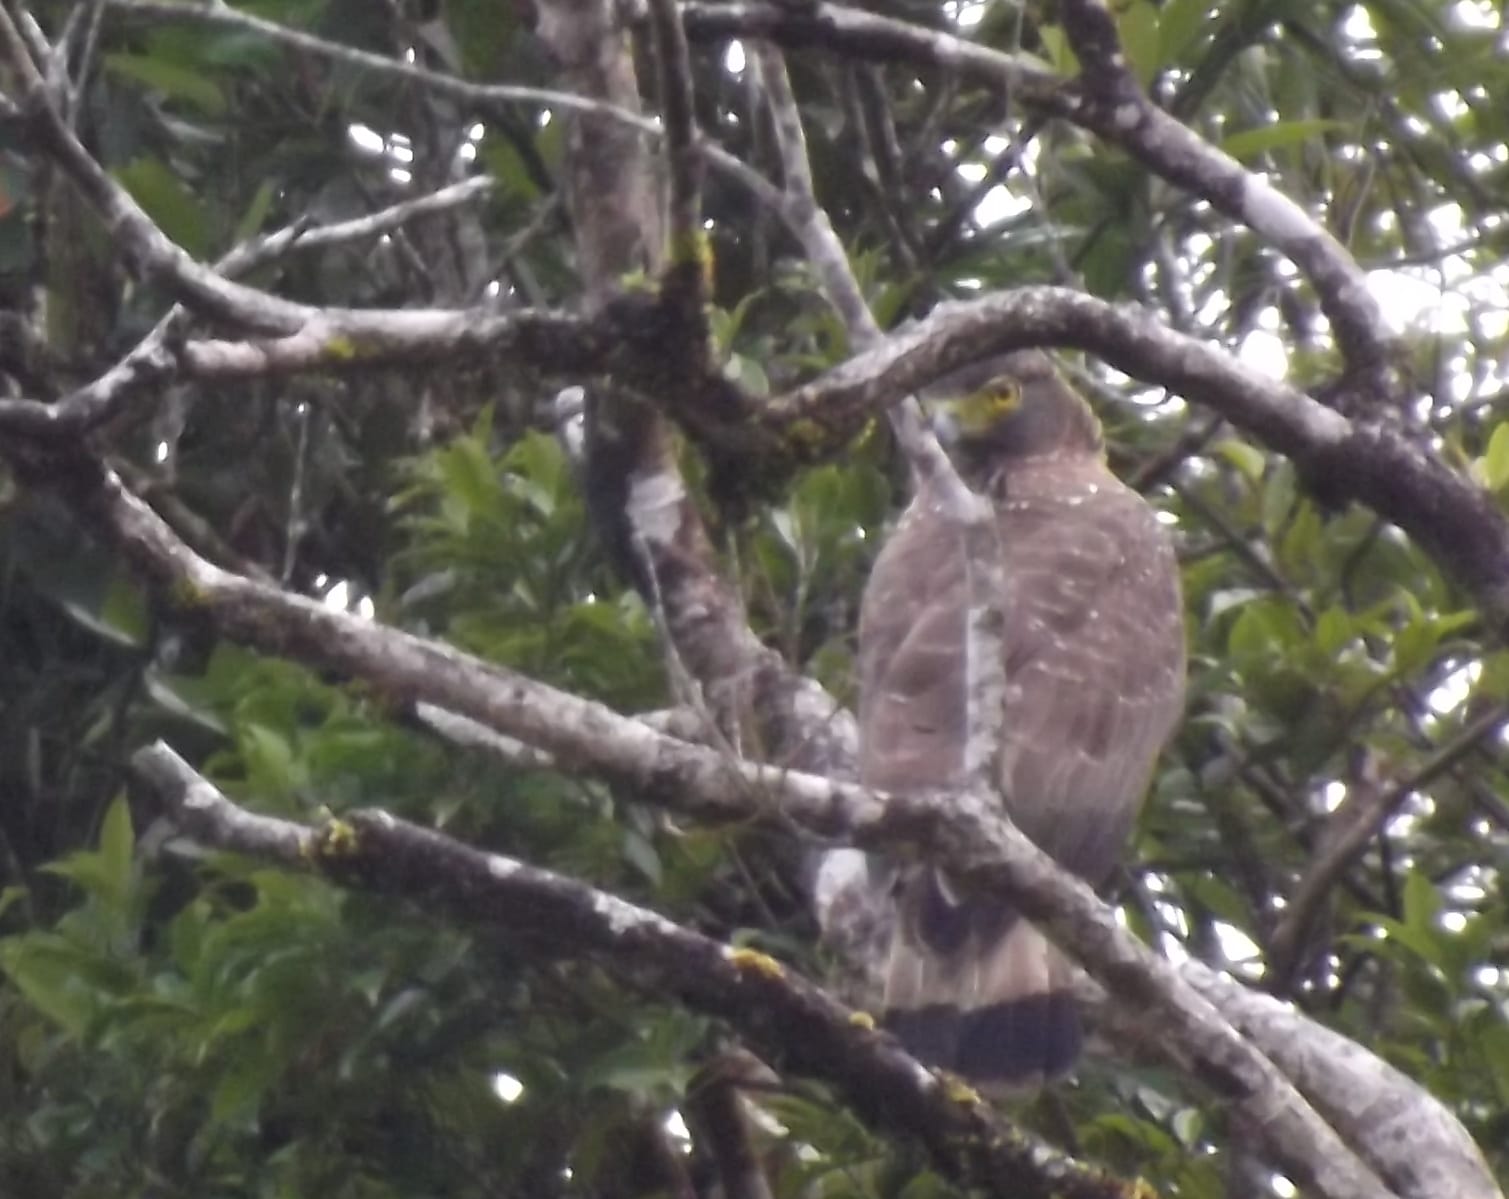 Philippine Serpent Eagle, along the road to Infanta, Quezon, March, 2013. Photo by Linda Gocon.